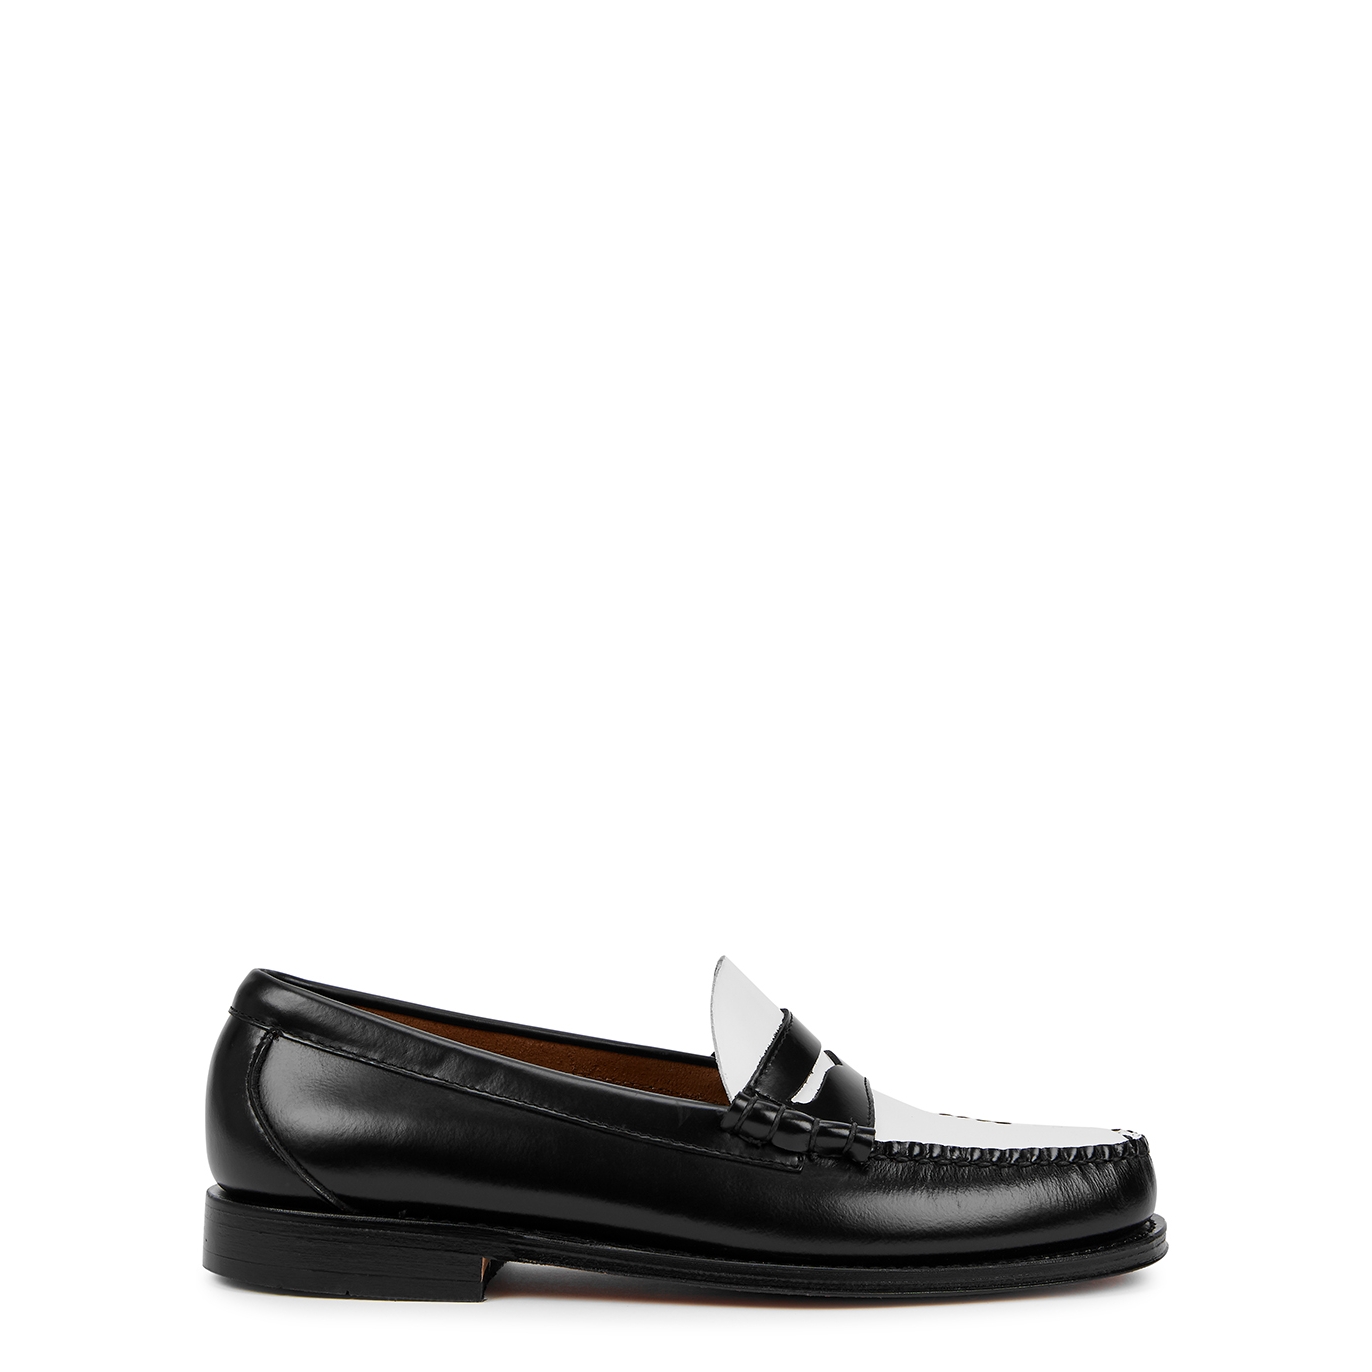 G.H Bass & Co Weejuns Heritage Larson Moc Monochrome Leather Loafers - Black And White - 9